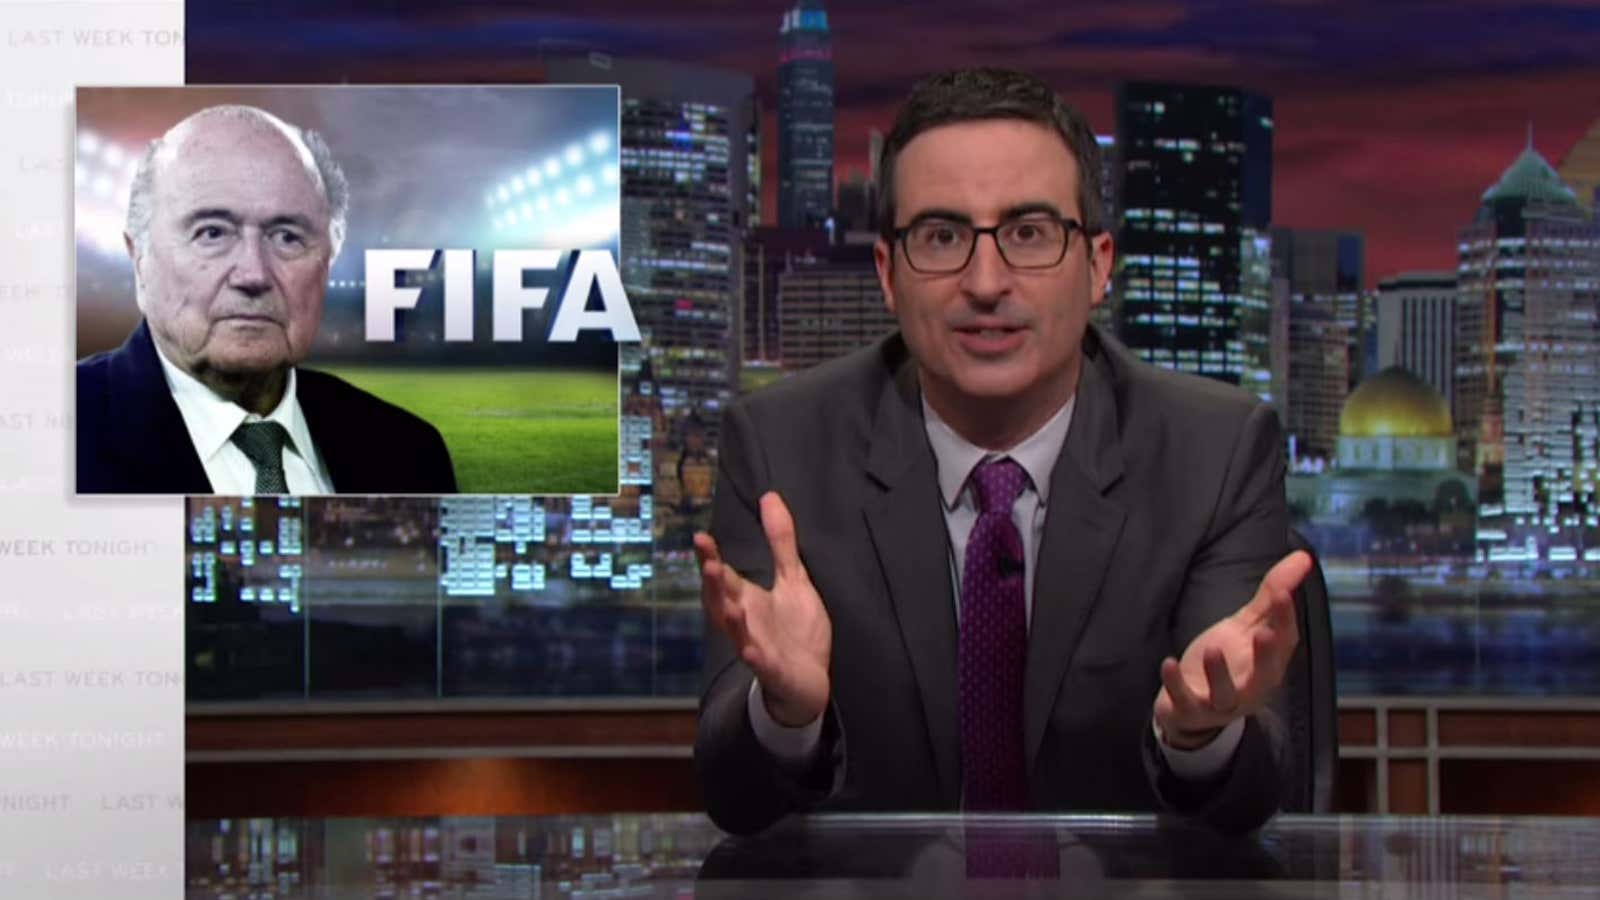 If only John Oliver were in charge of world soccer.